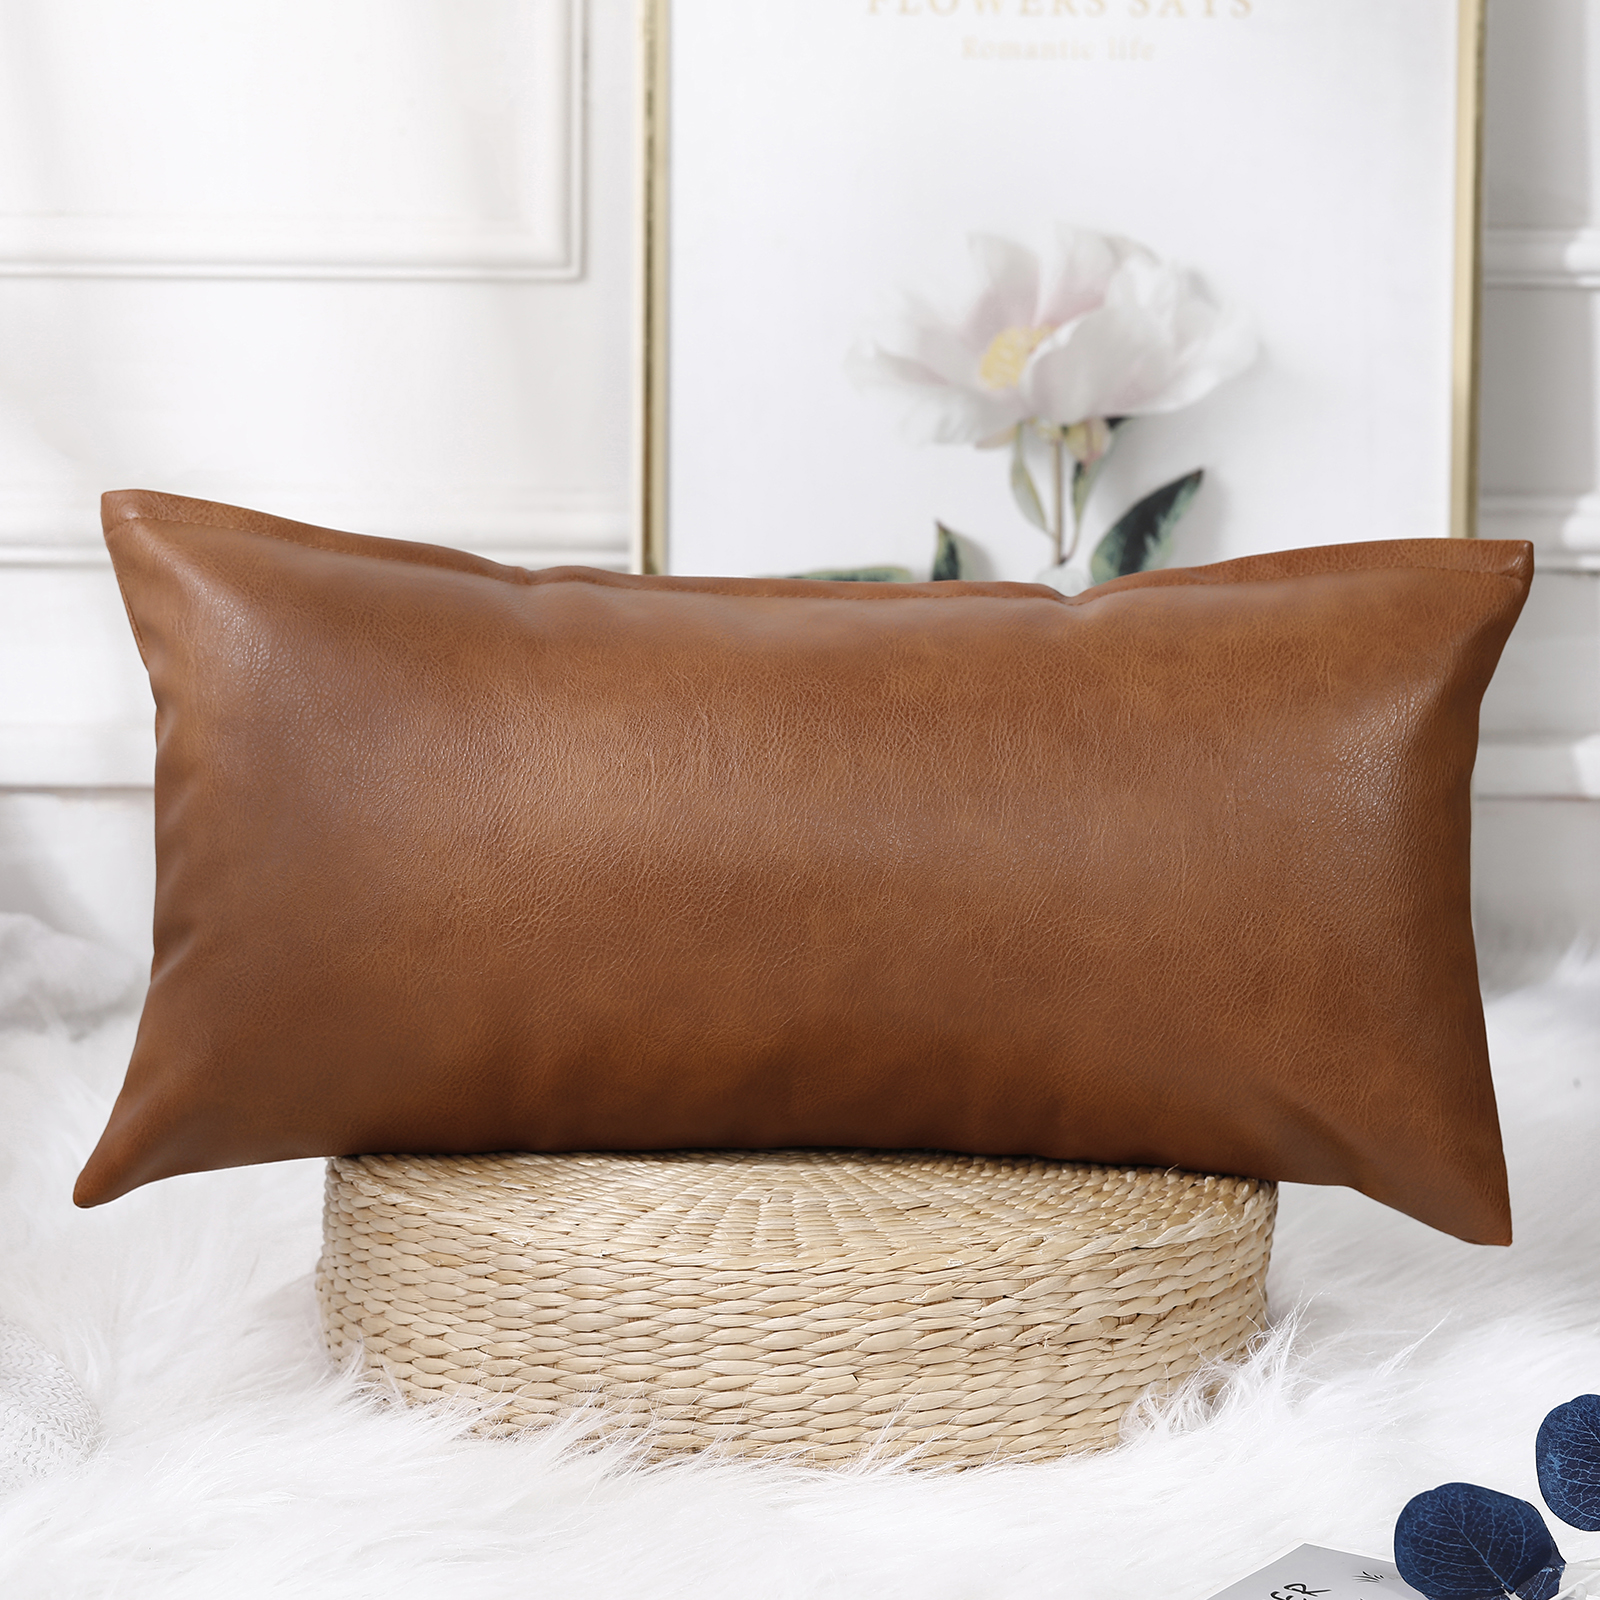 Faux Leather Throw Pillow Cover